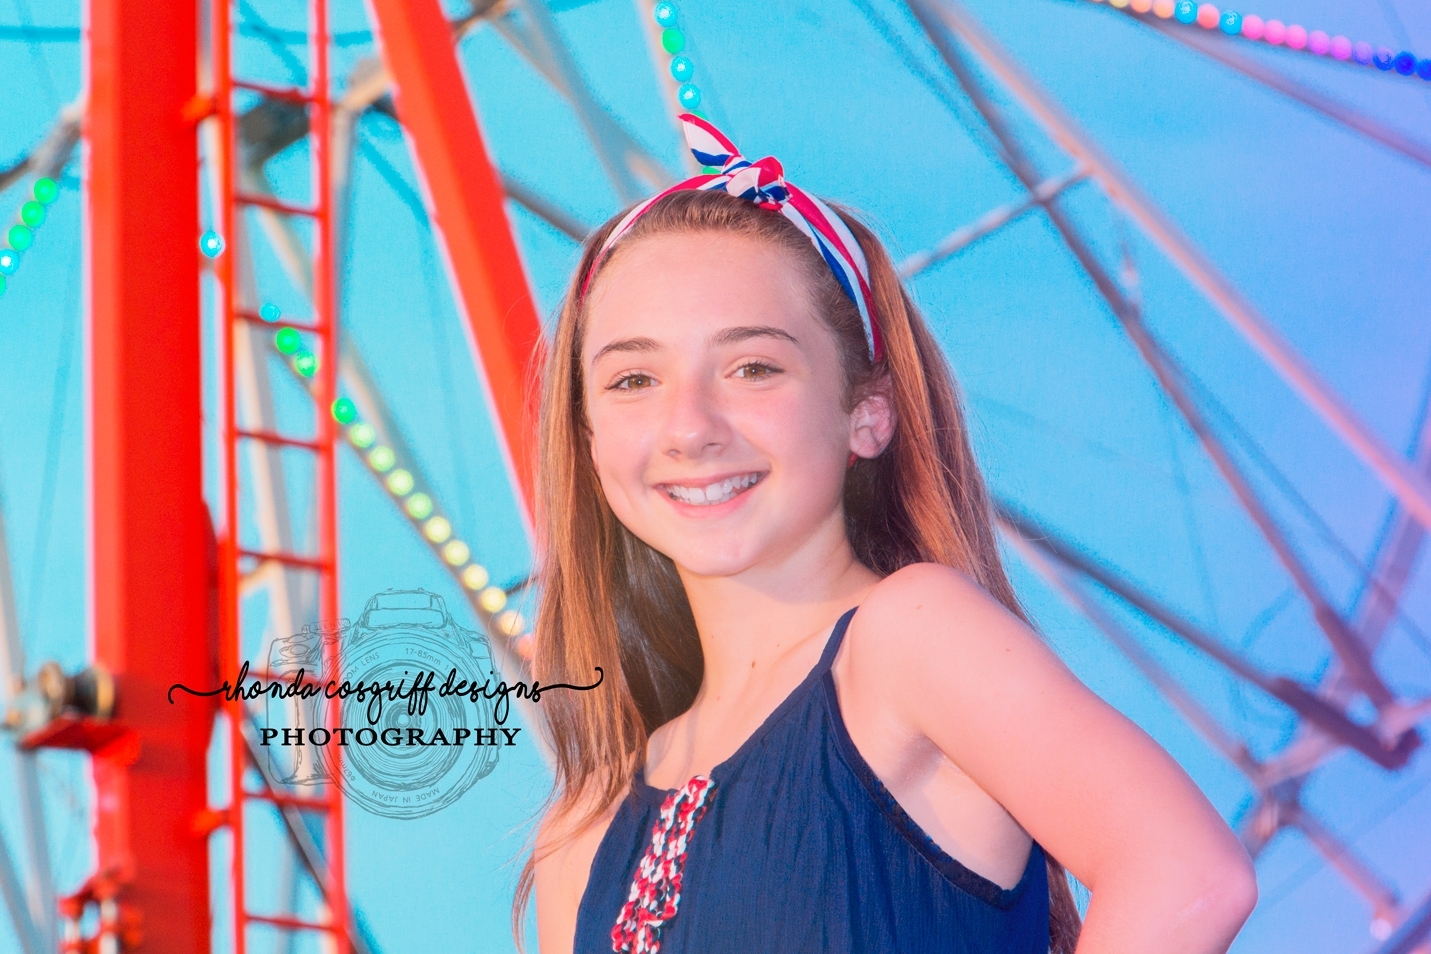 Portrait at the carnival by Rhonda Cosgriff Designs